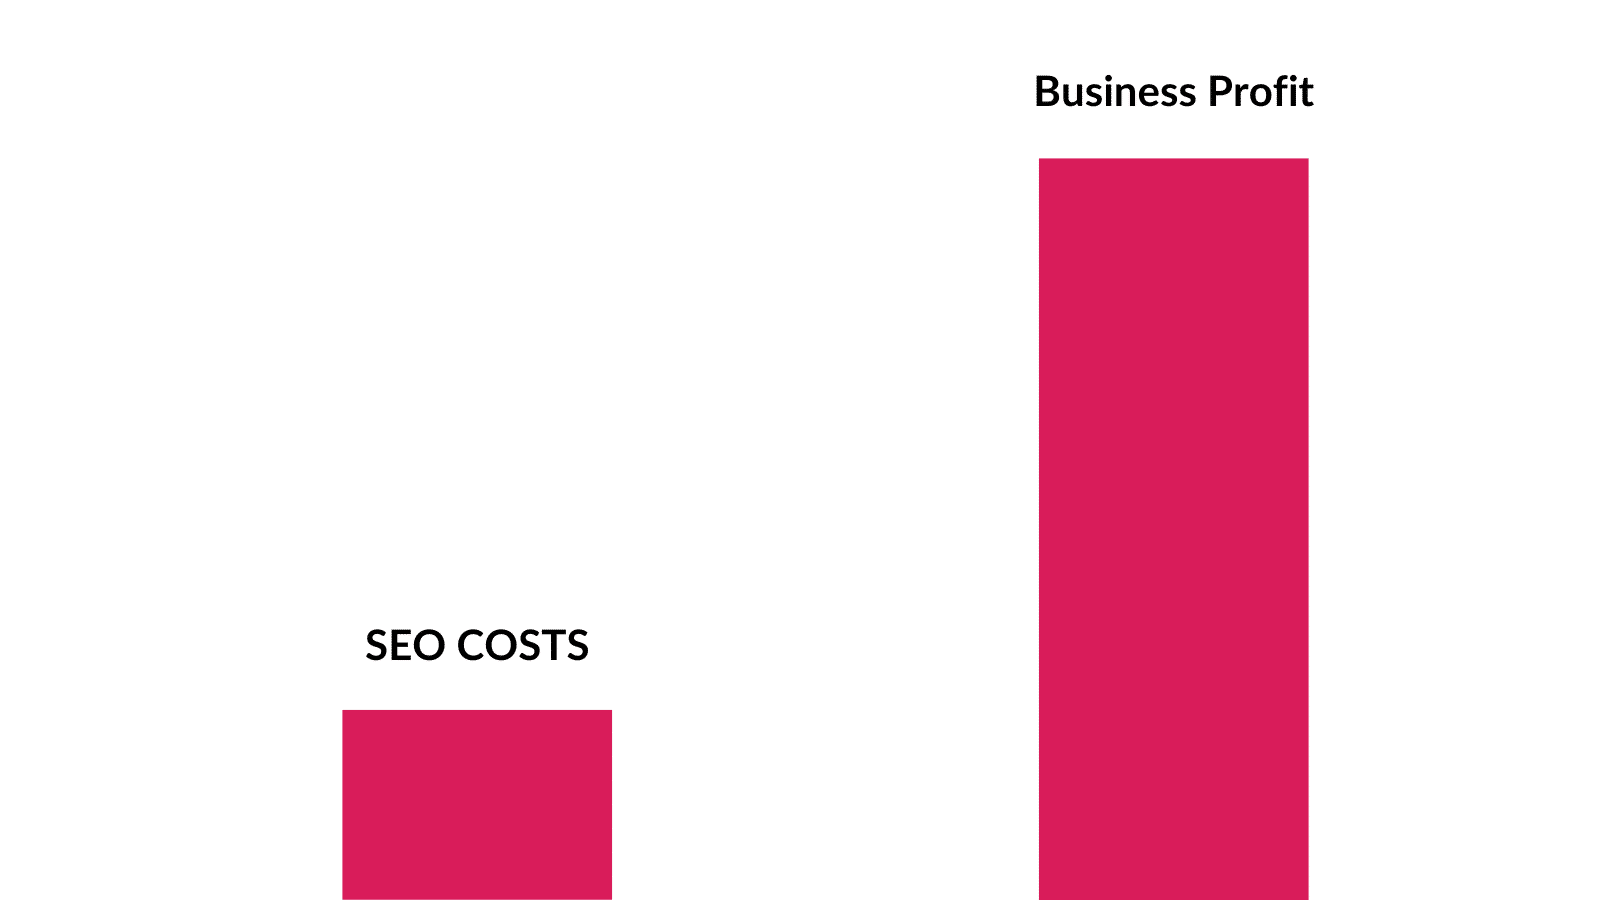 SEO costs and business profits